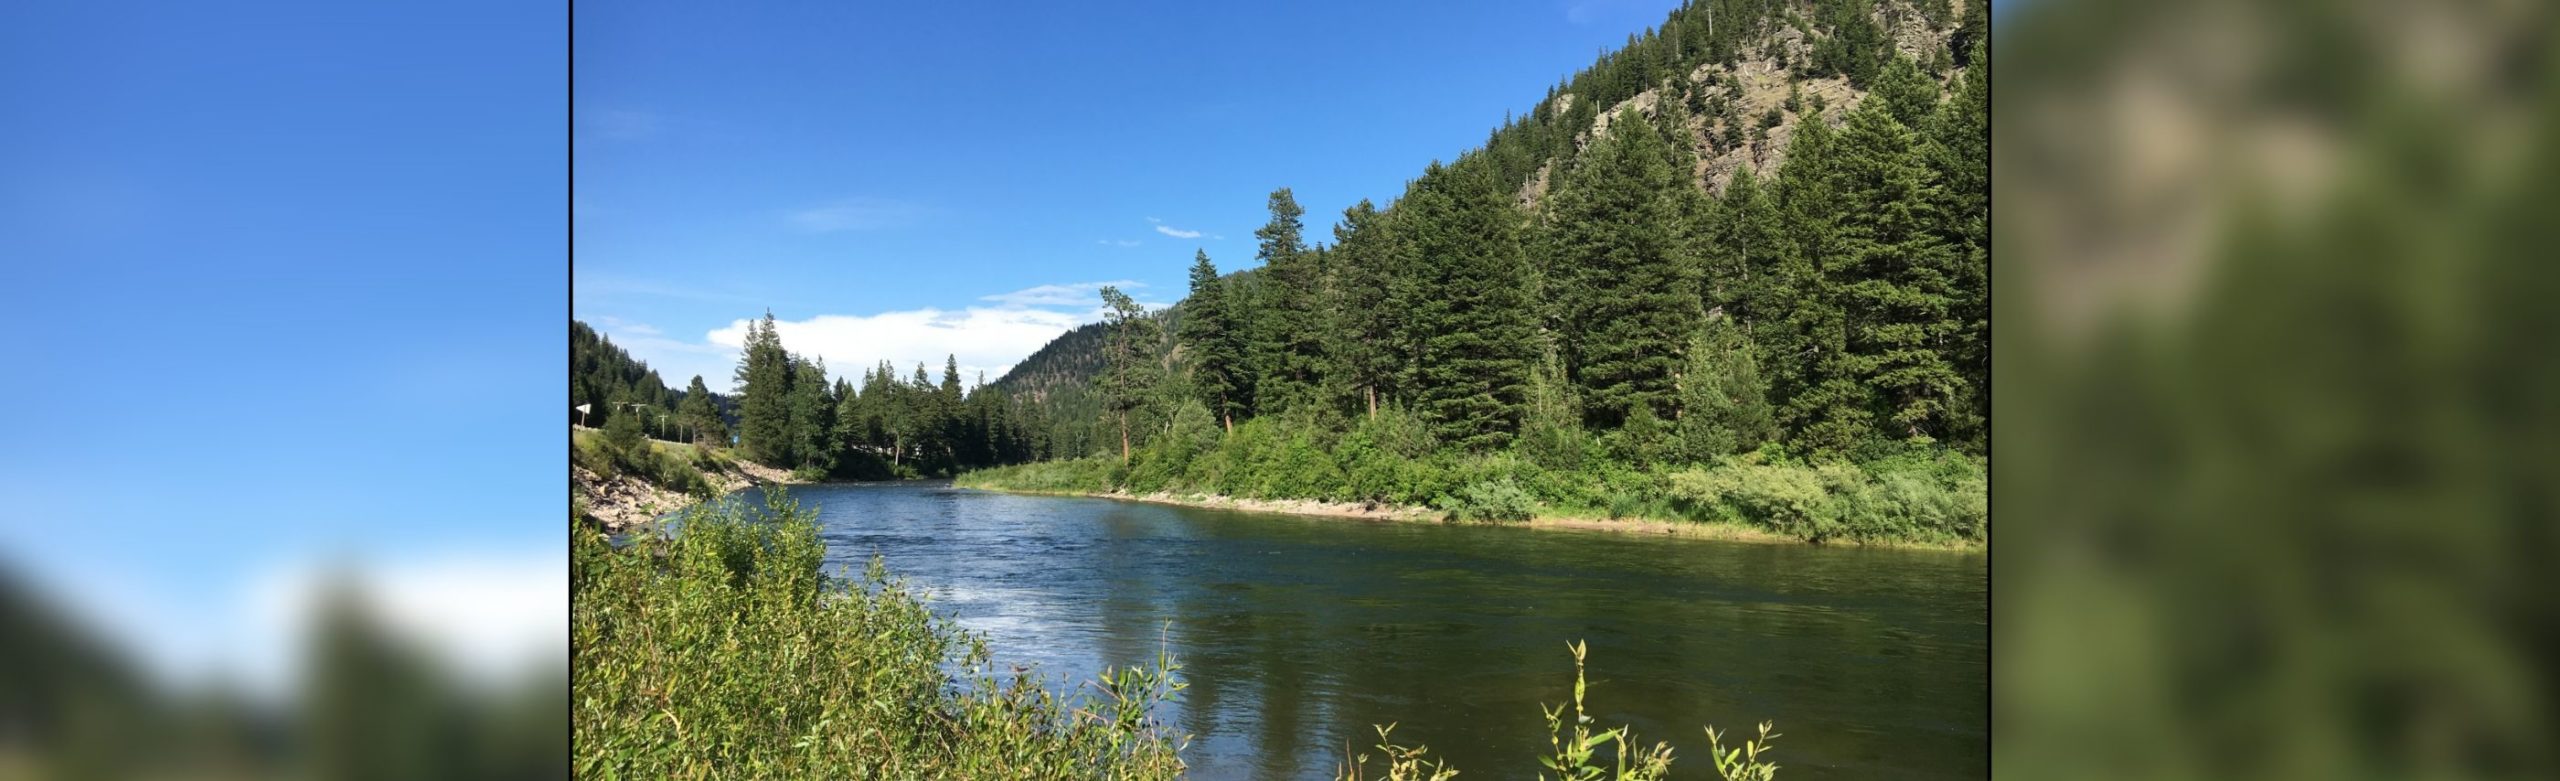 Keep It Pristine: The 16th Annual Blackfoot River Clean Up Image